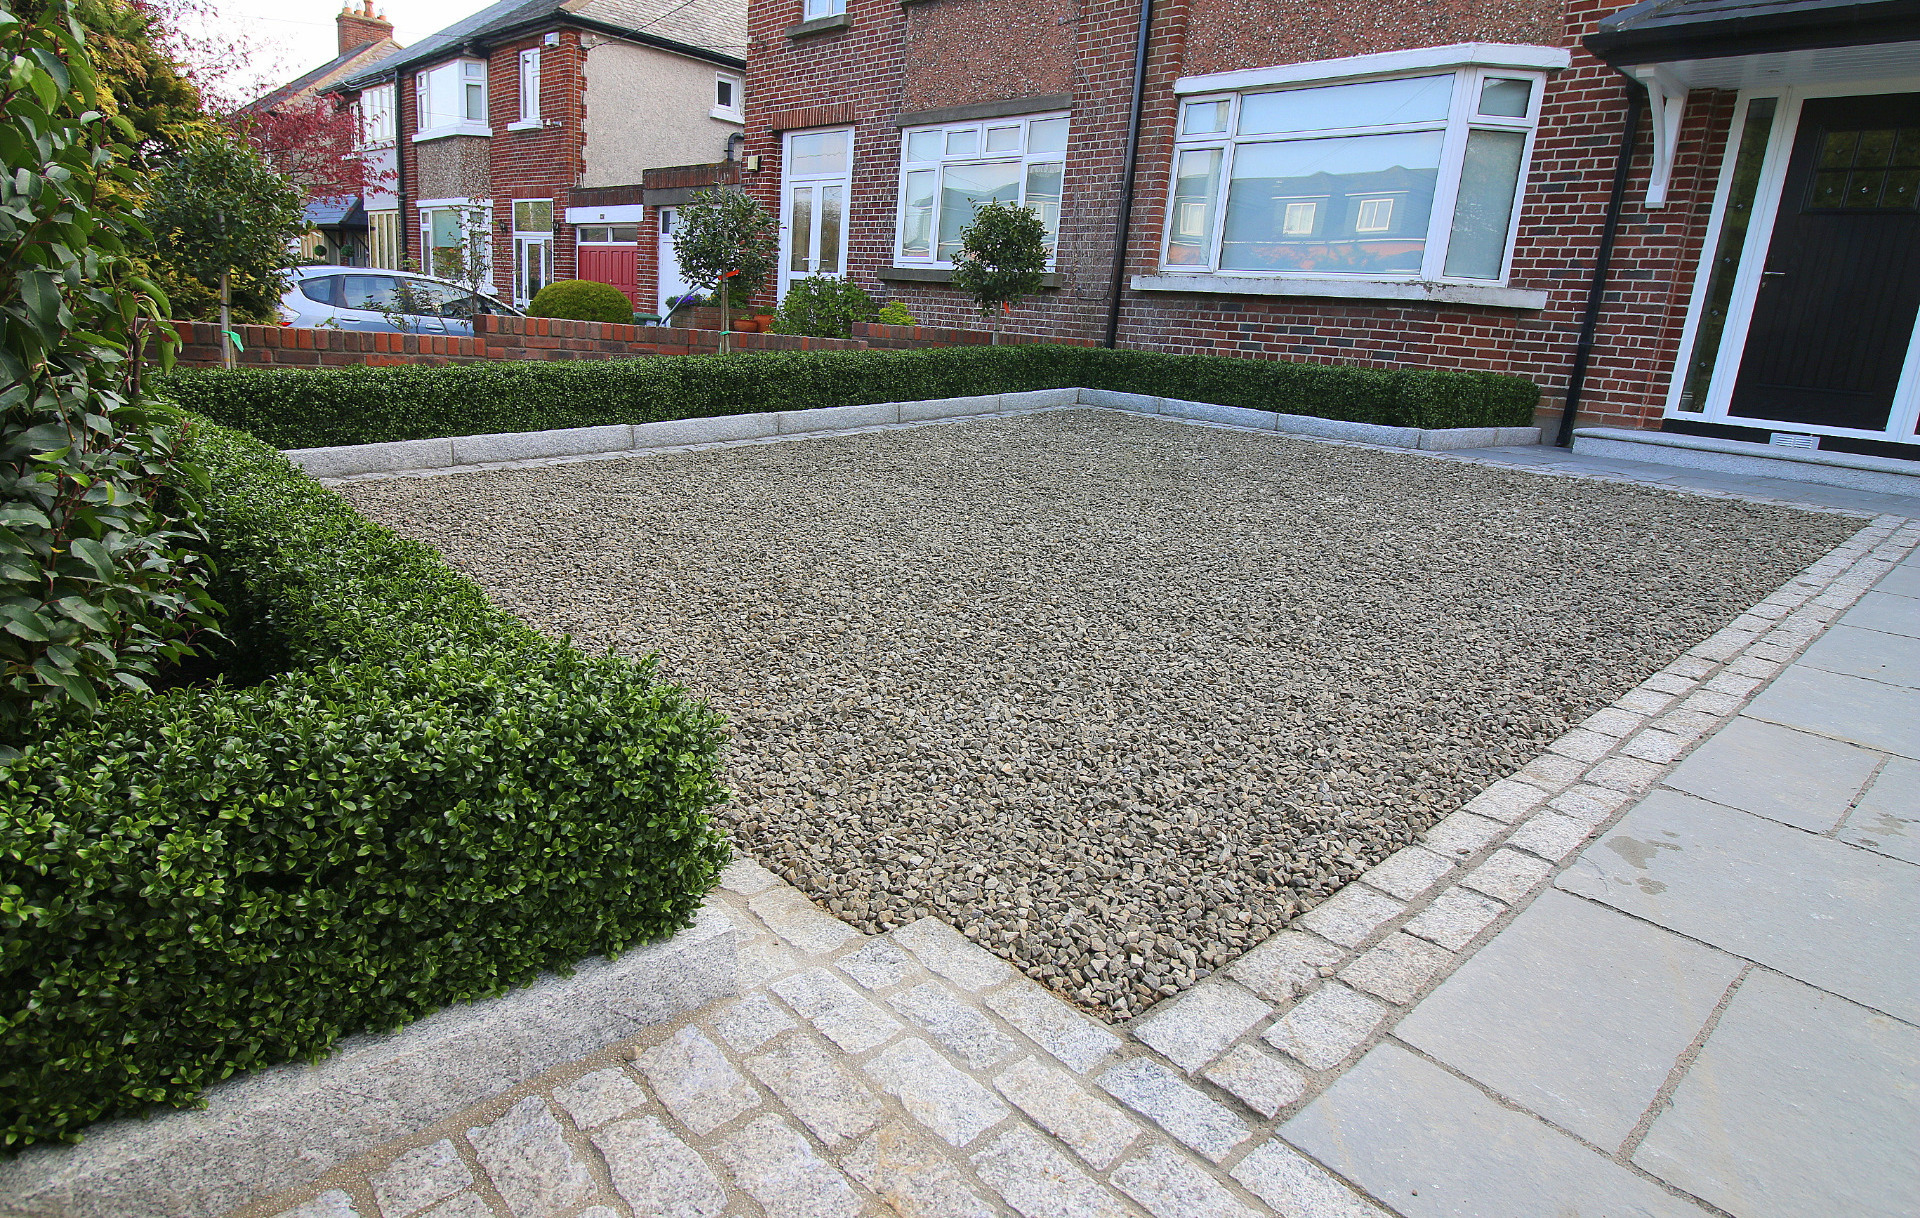 Driveway Design & Landscaping |Granite & Limestone paving | Supplied + fitted in Churchtown, Dublin 14.